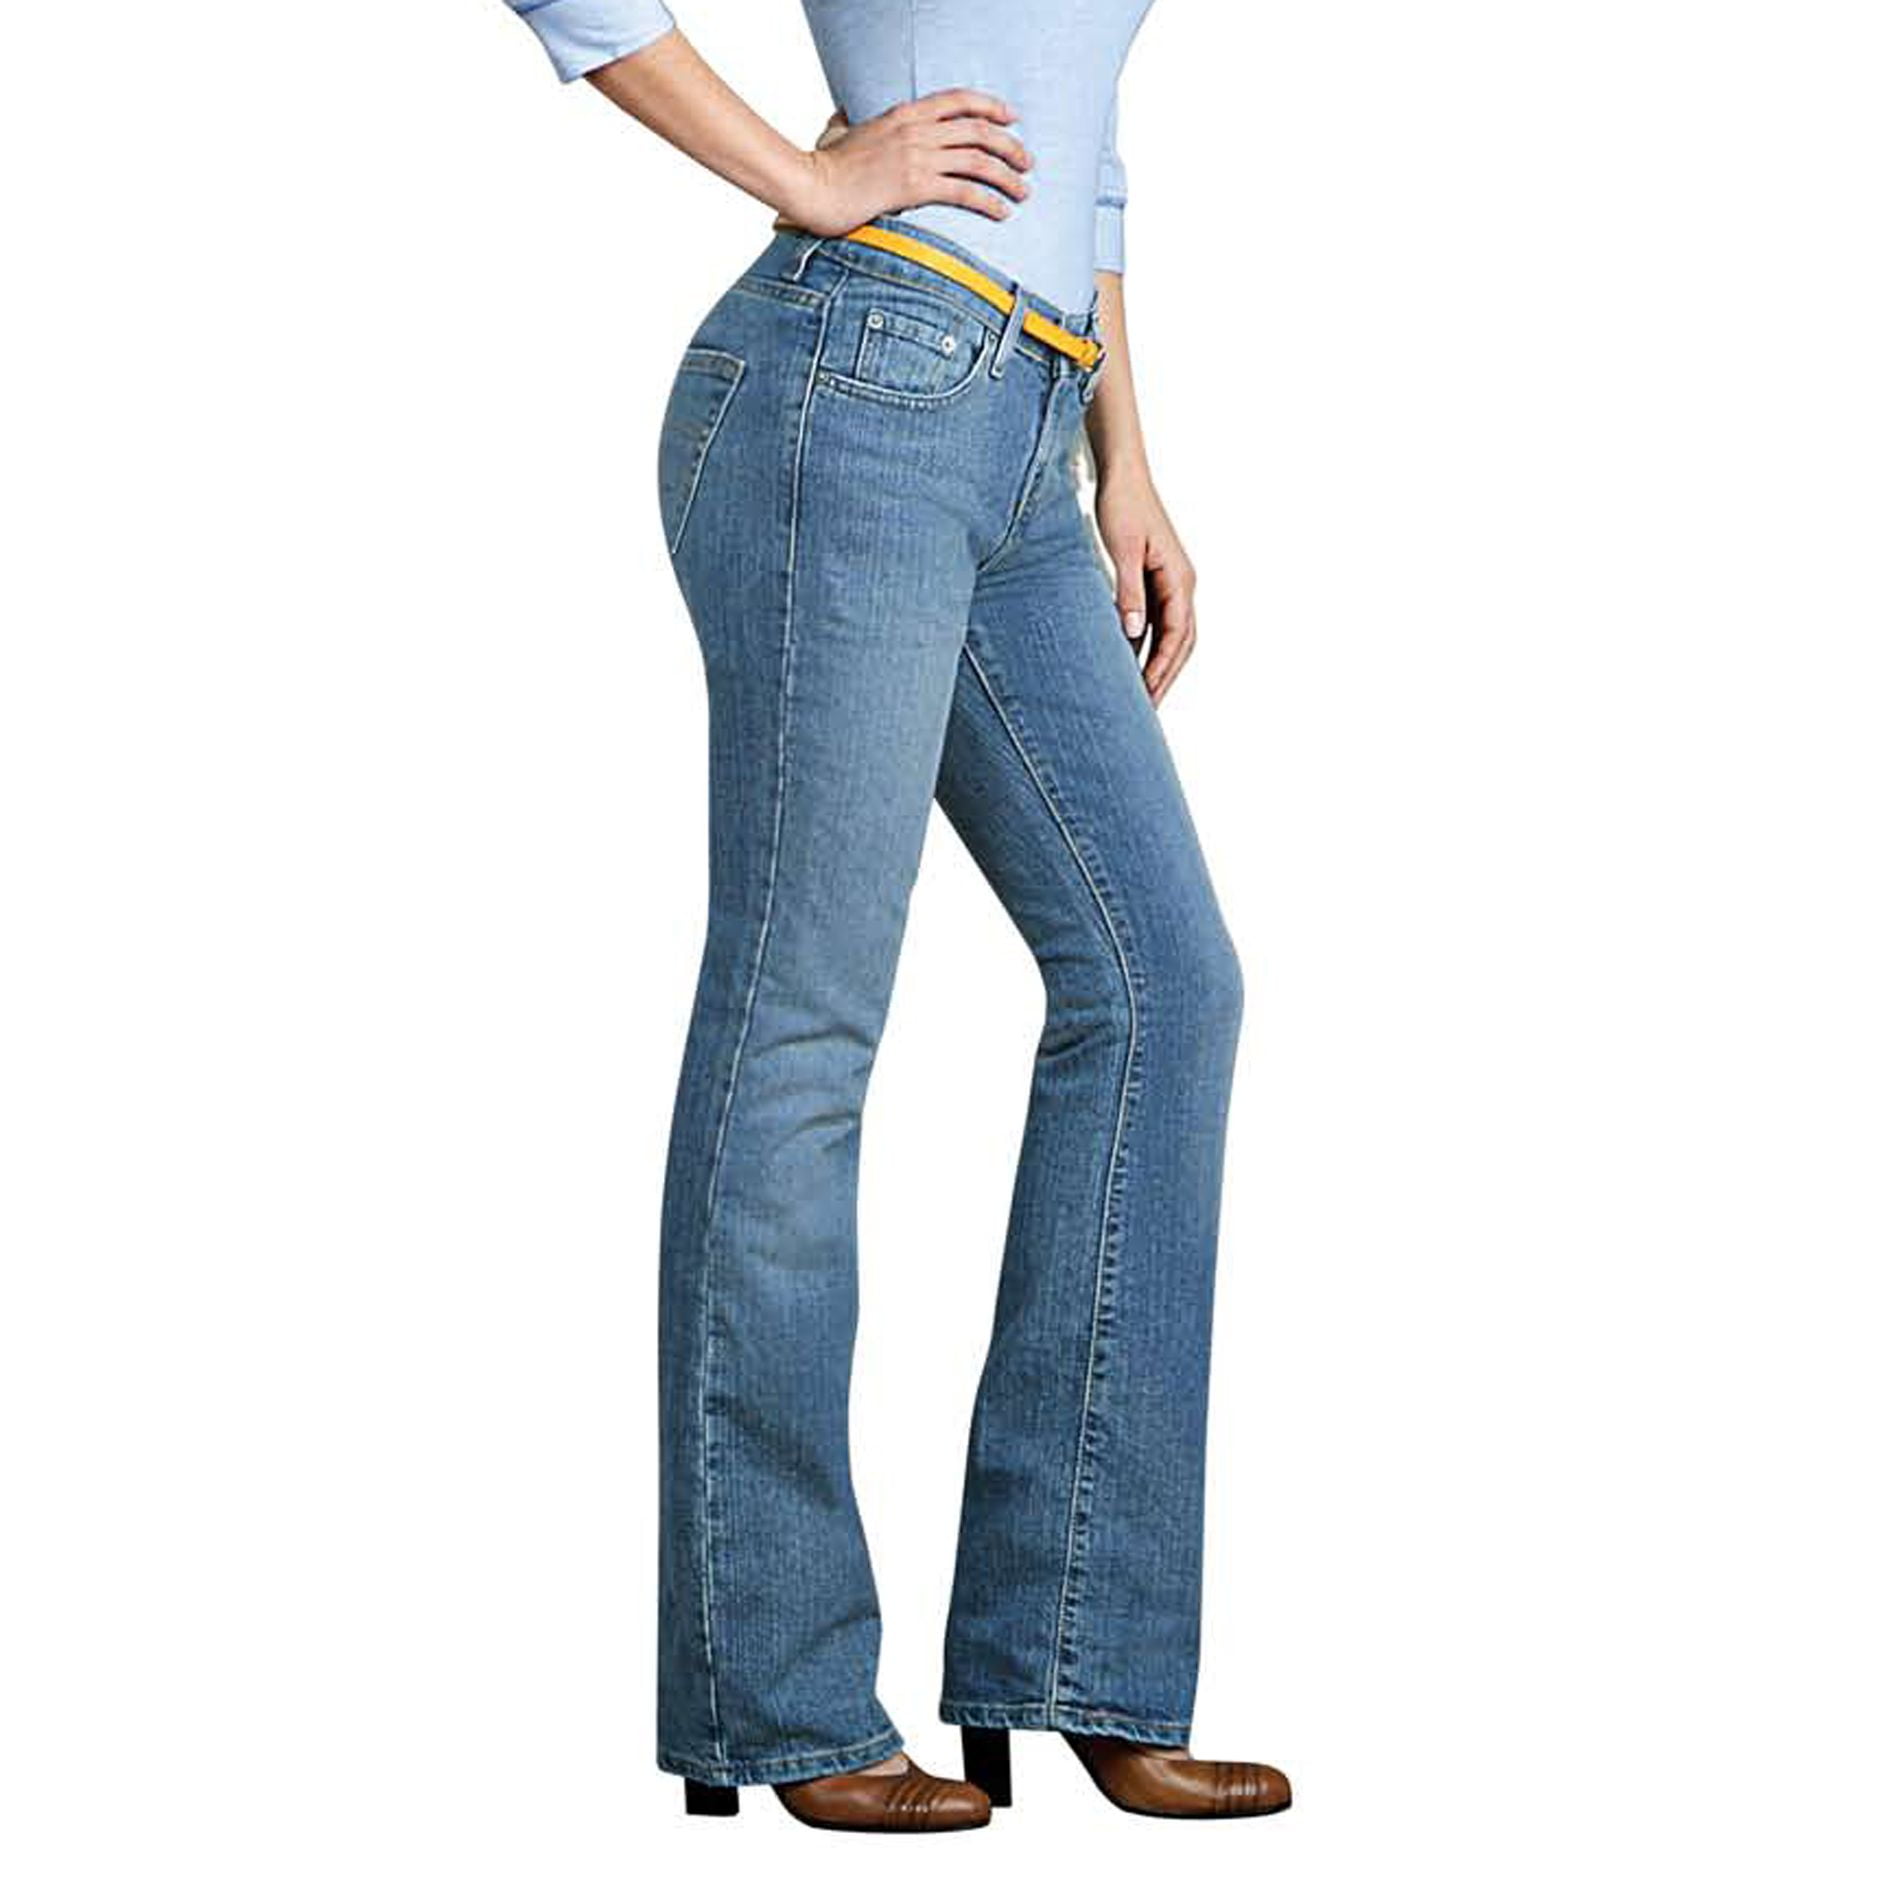 Levi's 528 and 529 Curvy Jeans